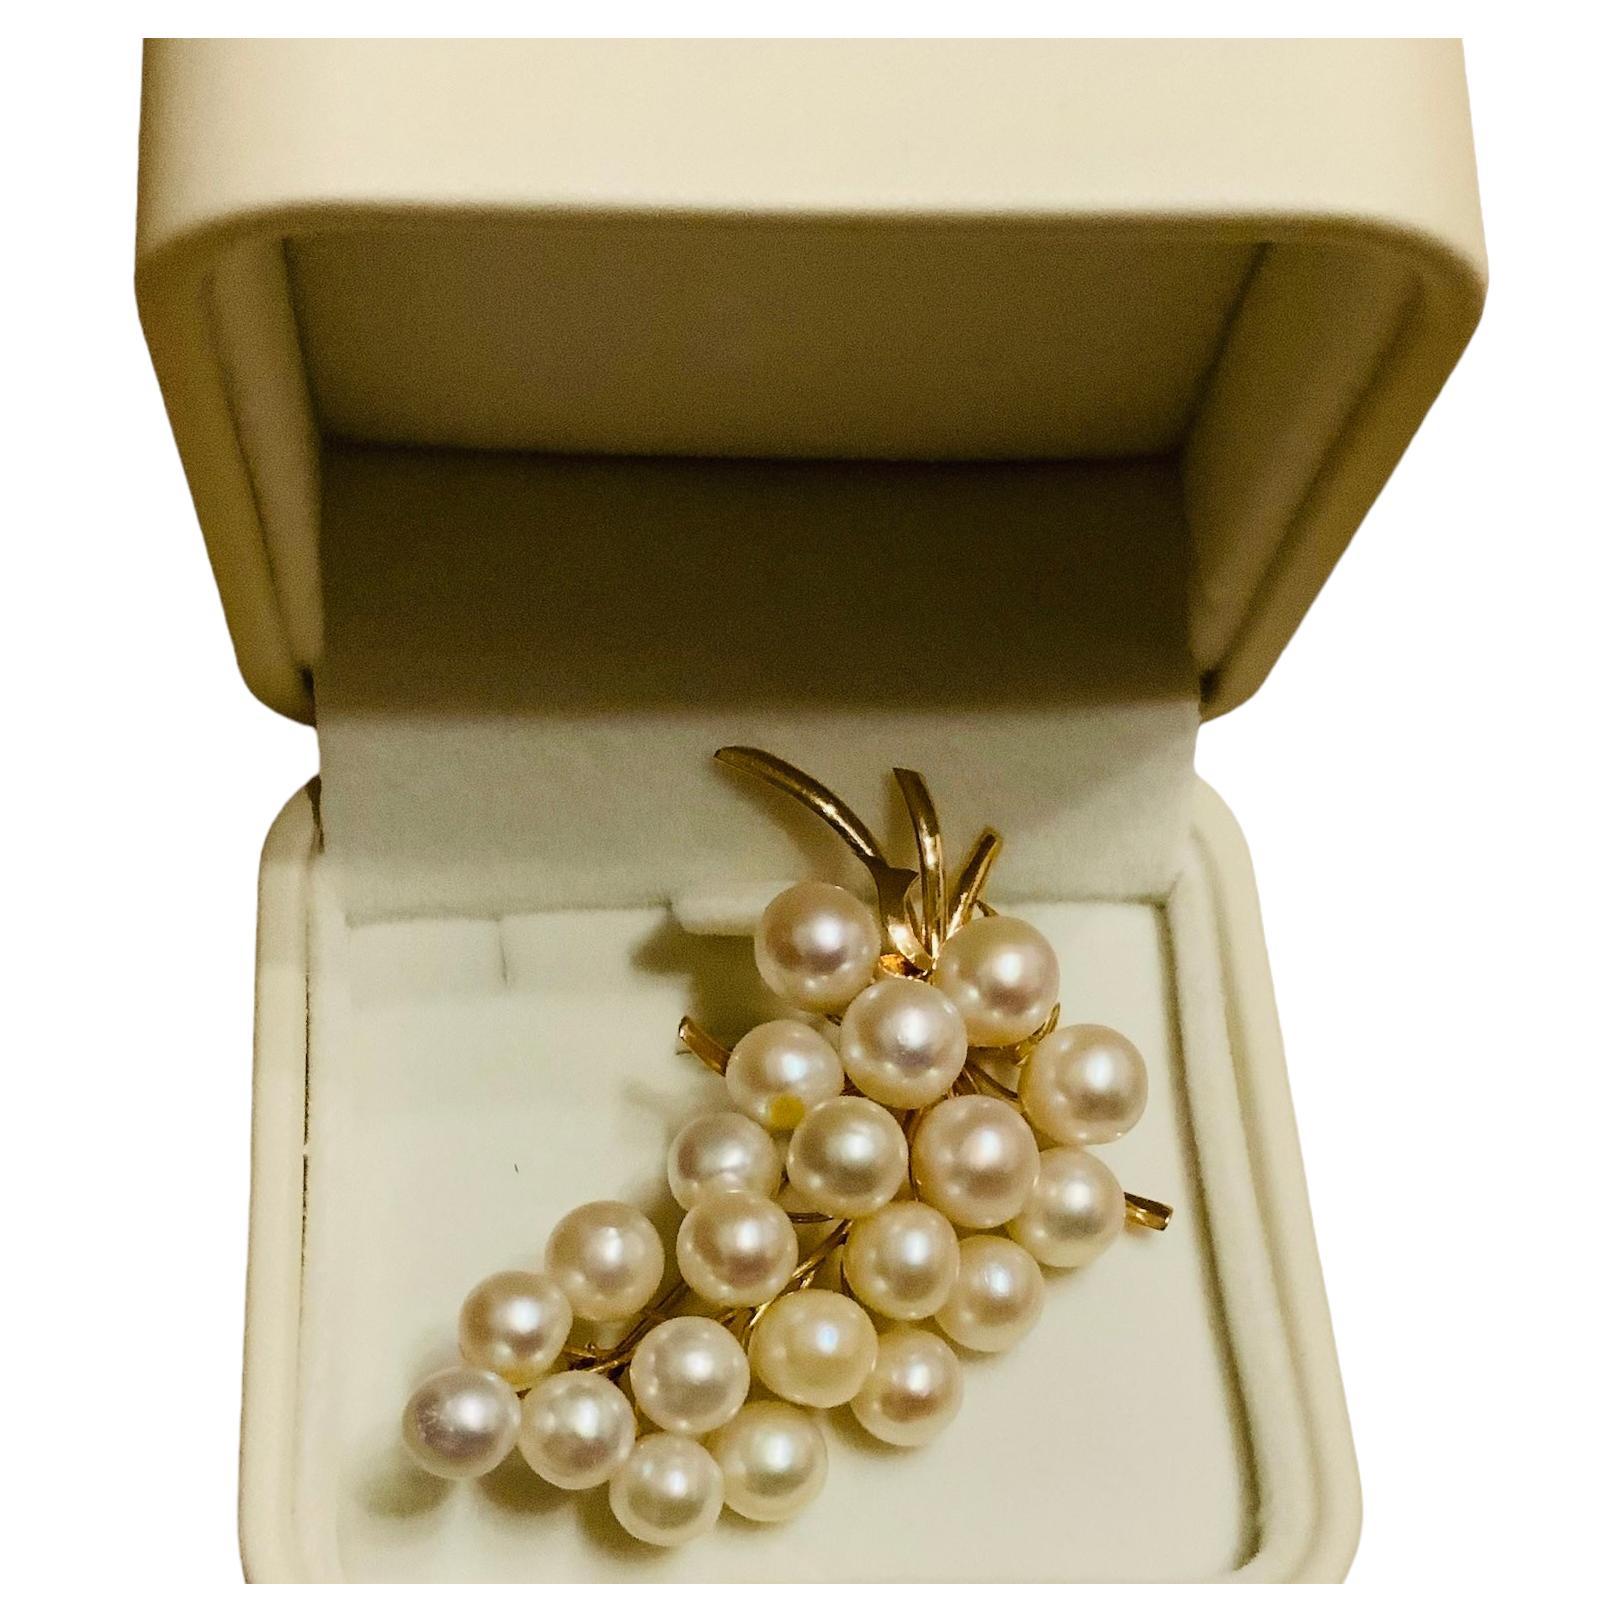 This is a 14K Yellow Gold and Pearl Brooch. It depicts twenty one Japanese cultured pearls arranged like a bunch of grapes. They measure from 5 to 9mm each one. They are attached to different 14k yellow gold branches. Its weight is 4.7 dwt.